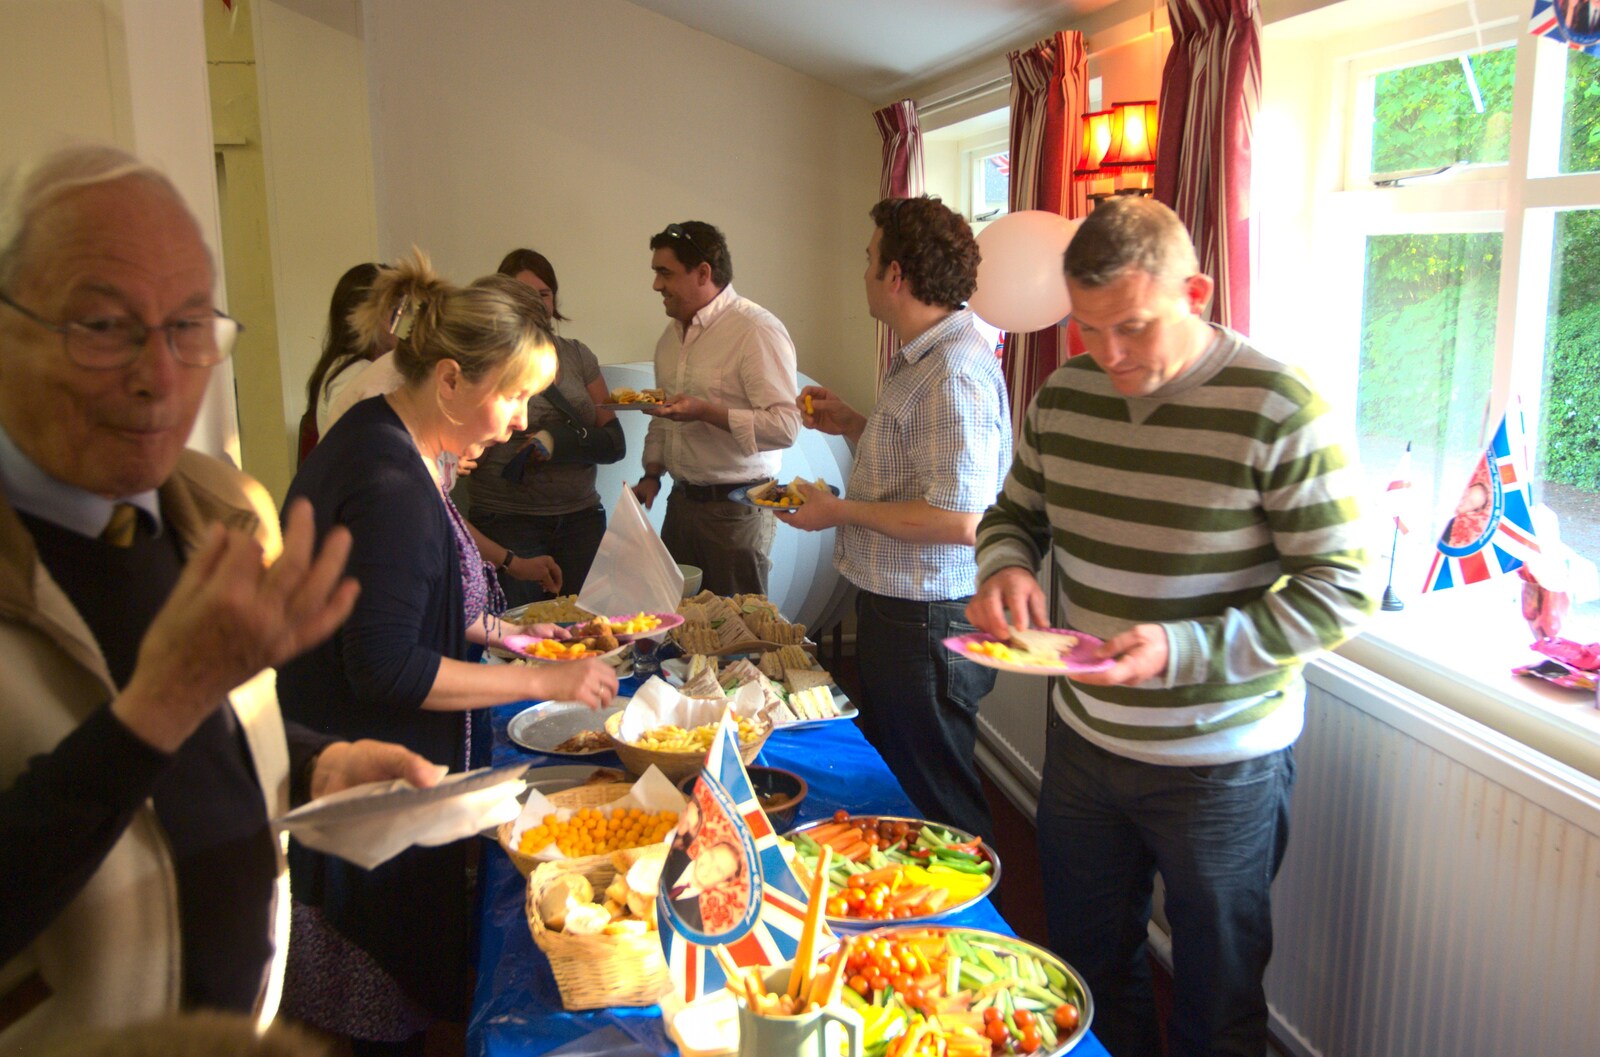 Charles gets some party food from Charles and the Royal Wedding, Brome, Suffolk - 24th April 2011